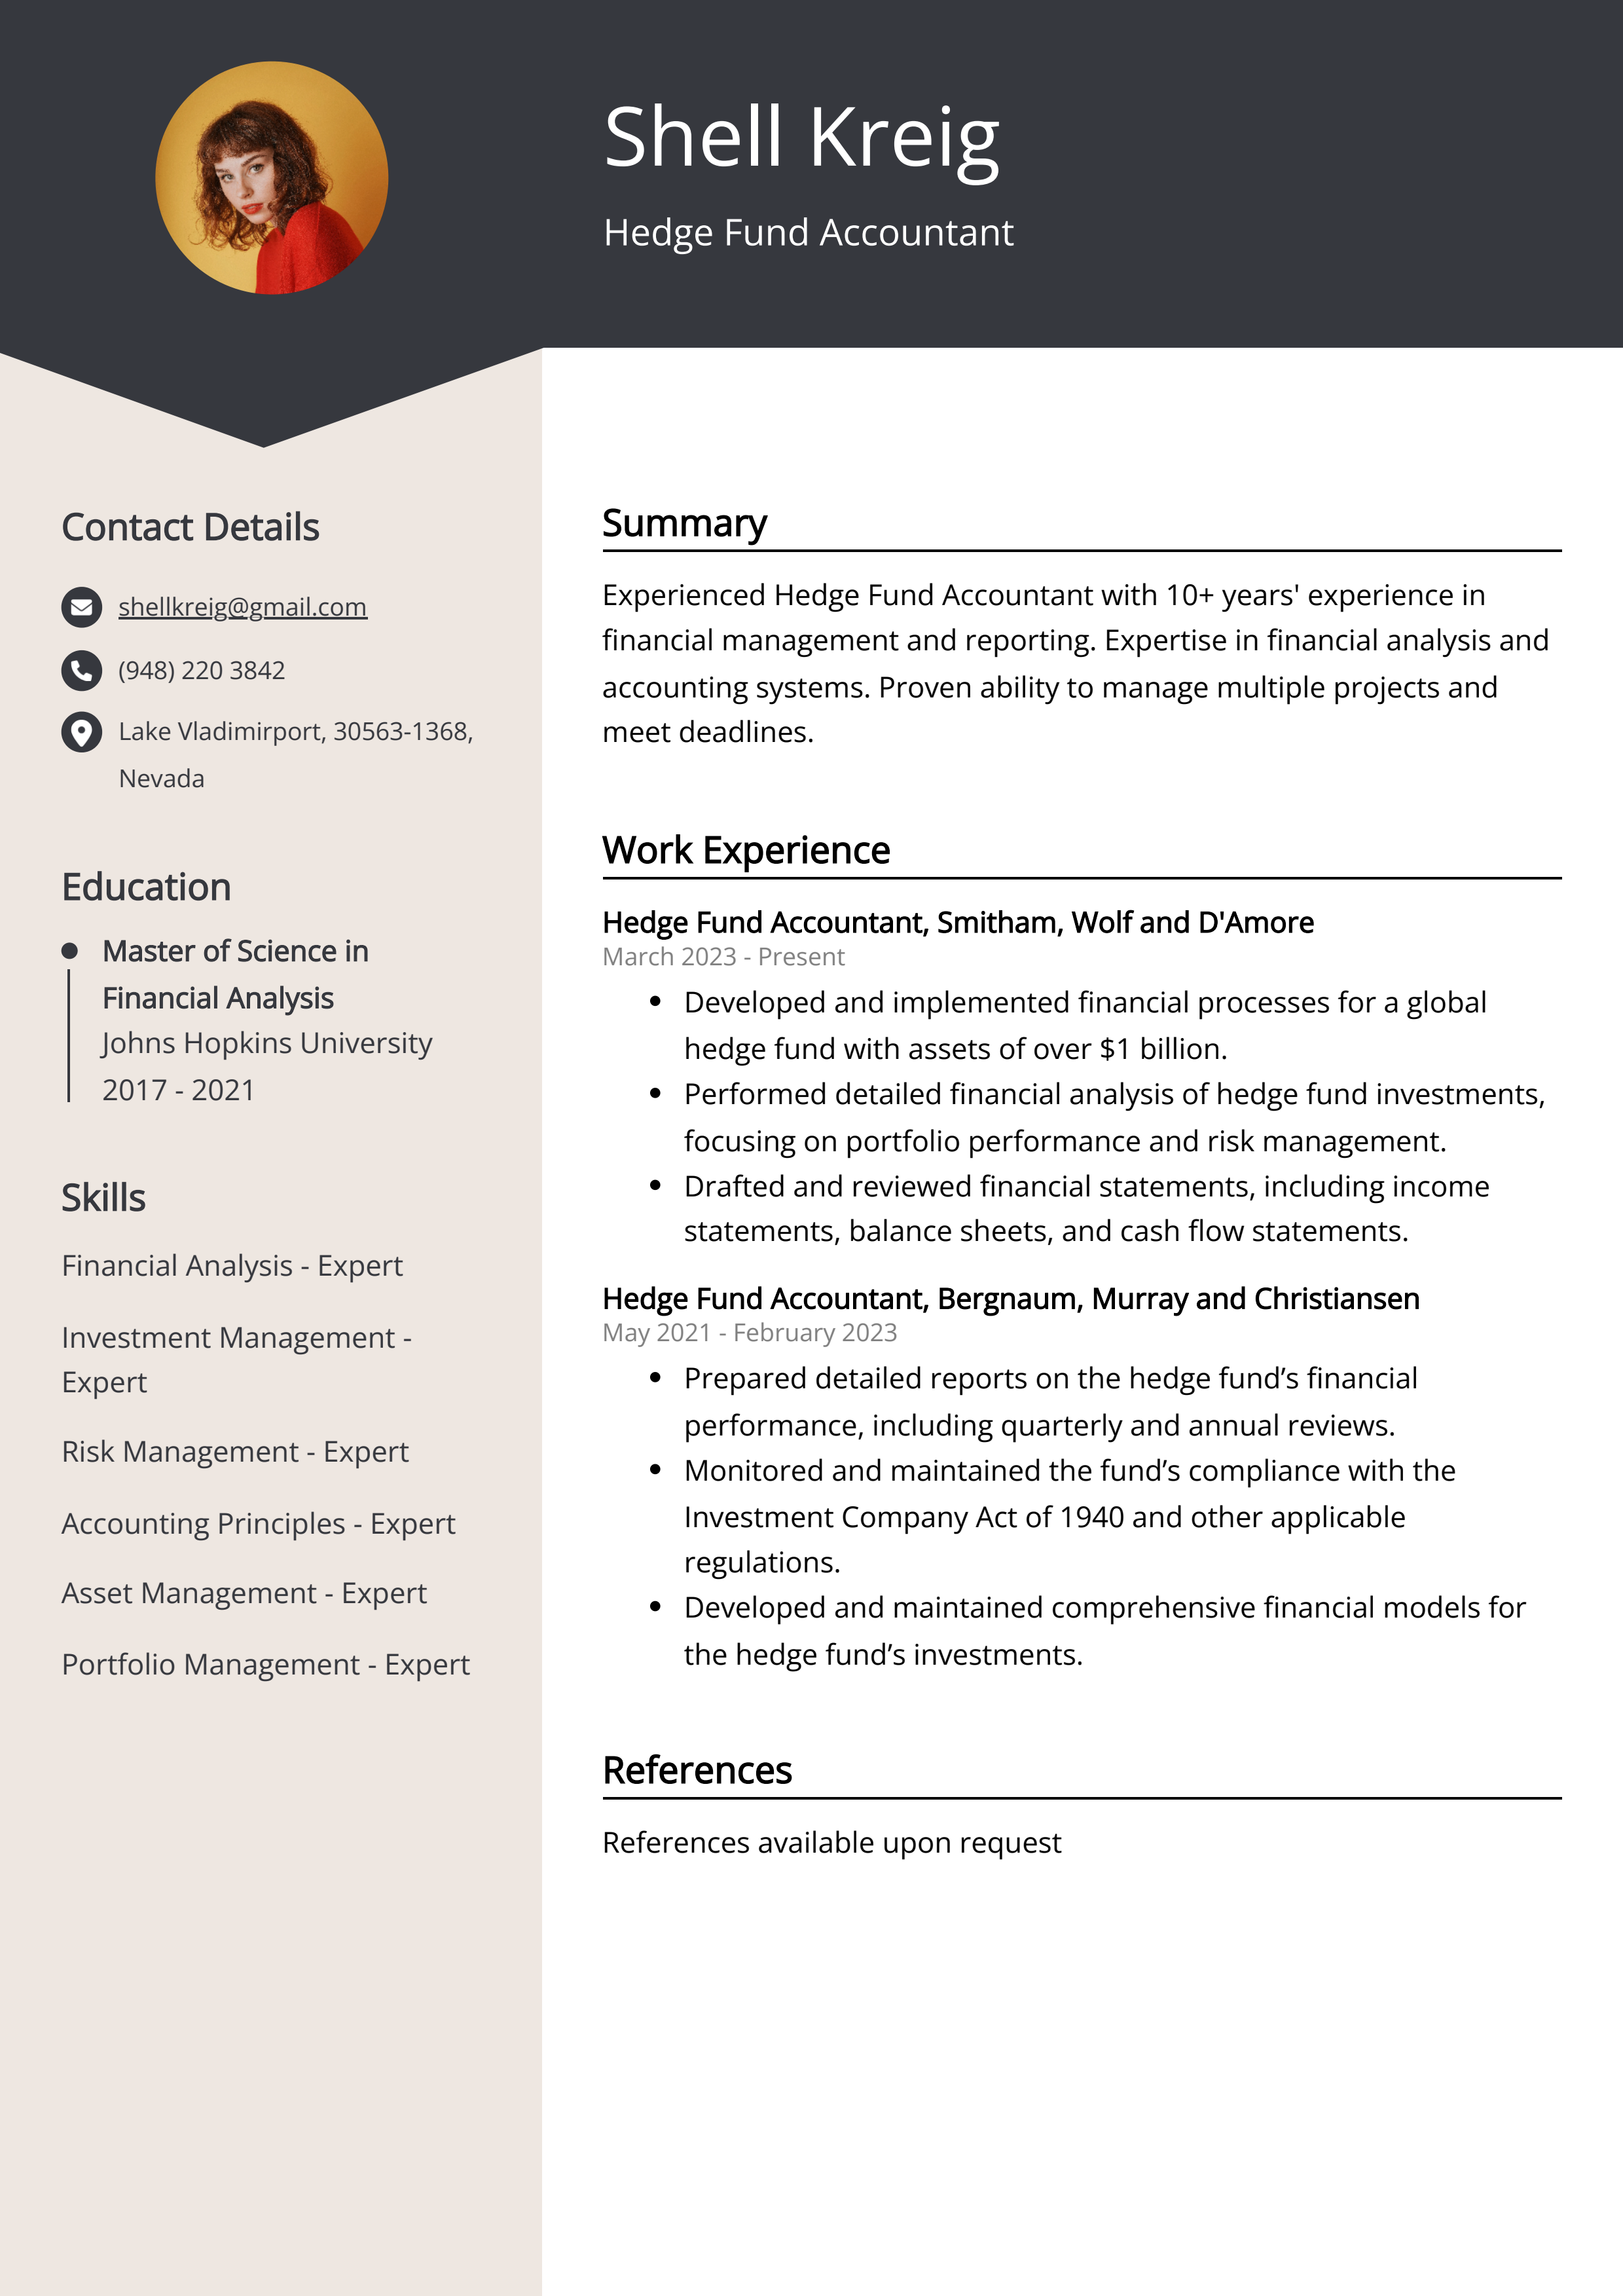 Hedge Fund Accountant CV Example